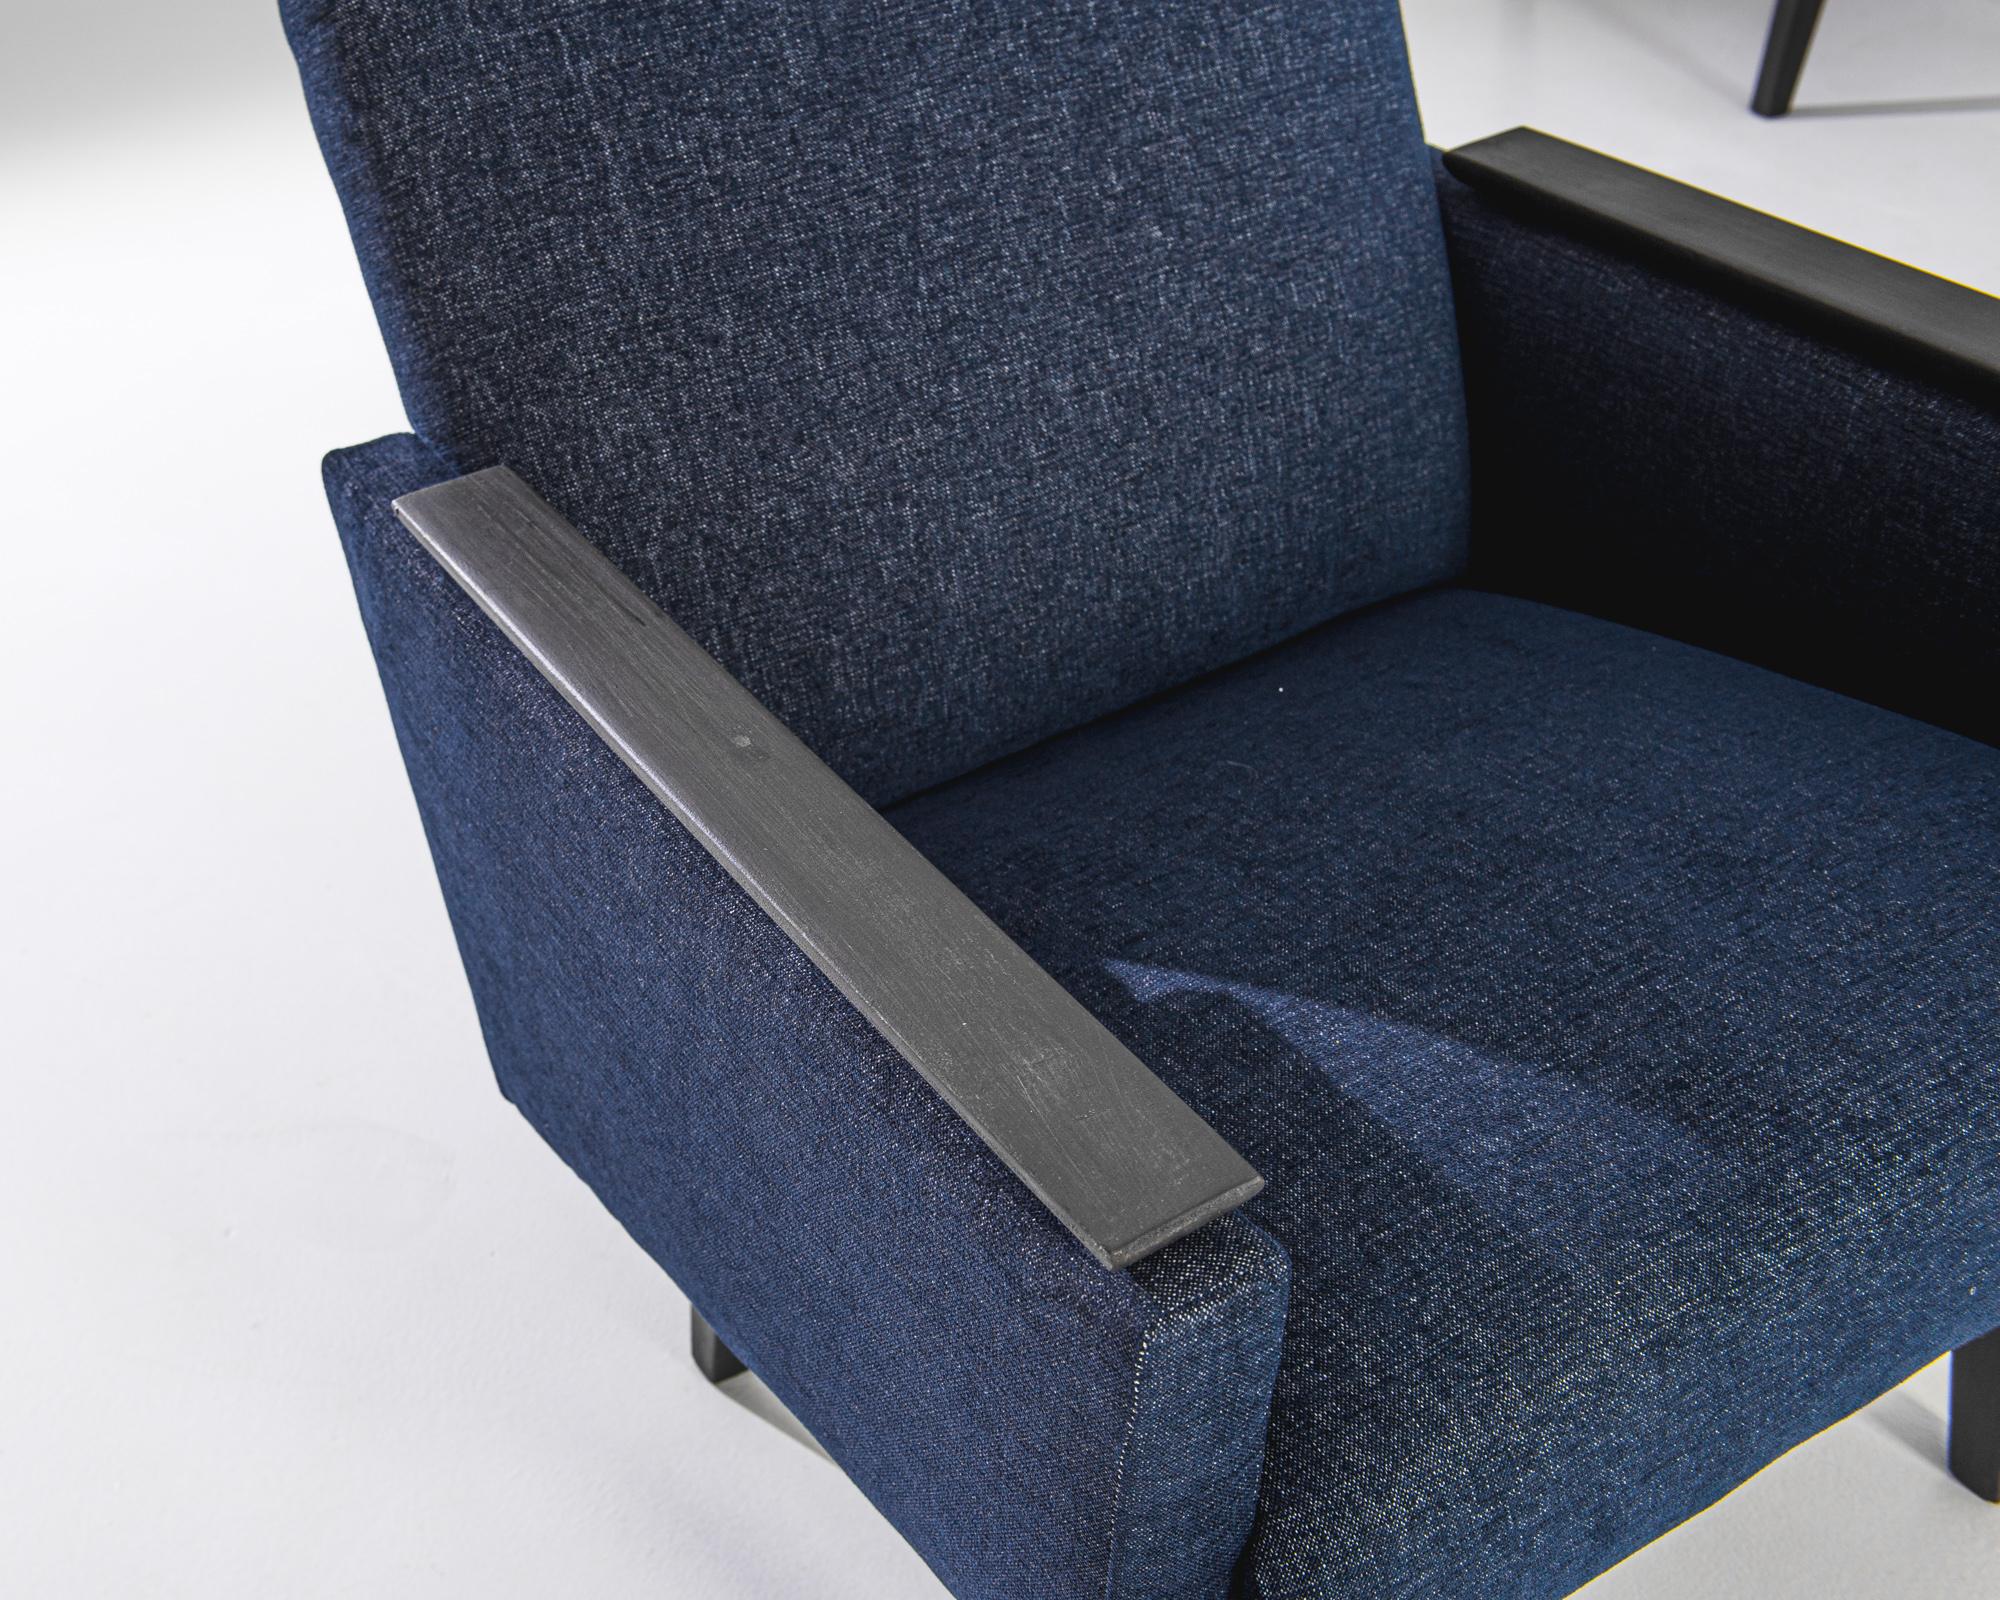 A pair of upholstered wooden armchairs from France, produced circa 1960. A smart set in a deep, dark, denim blue, featuring black patinated wooden armrests and legs. Chic slants create a sloping seat back and trapezoidal side panels in this